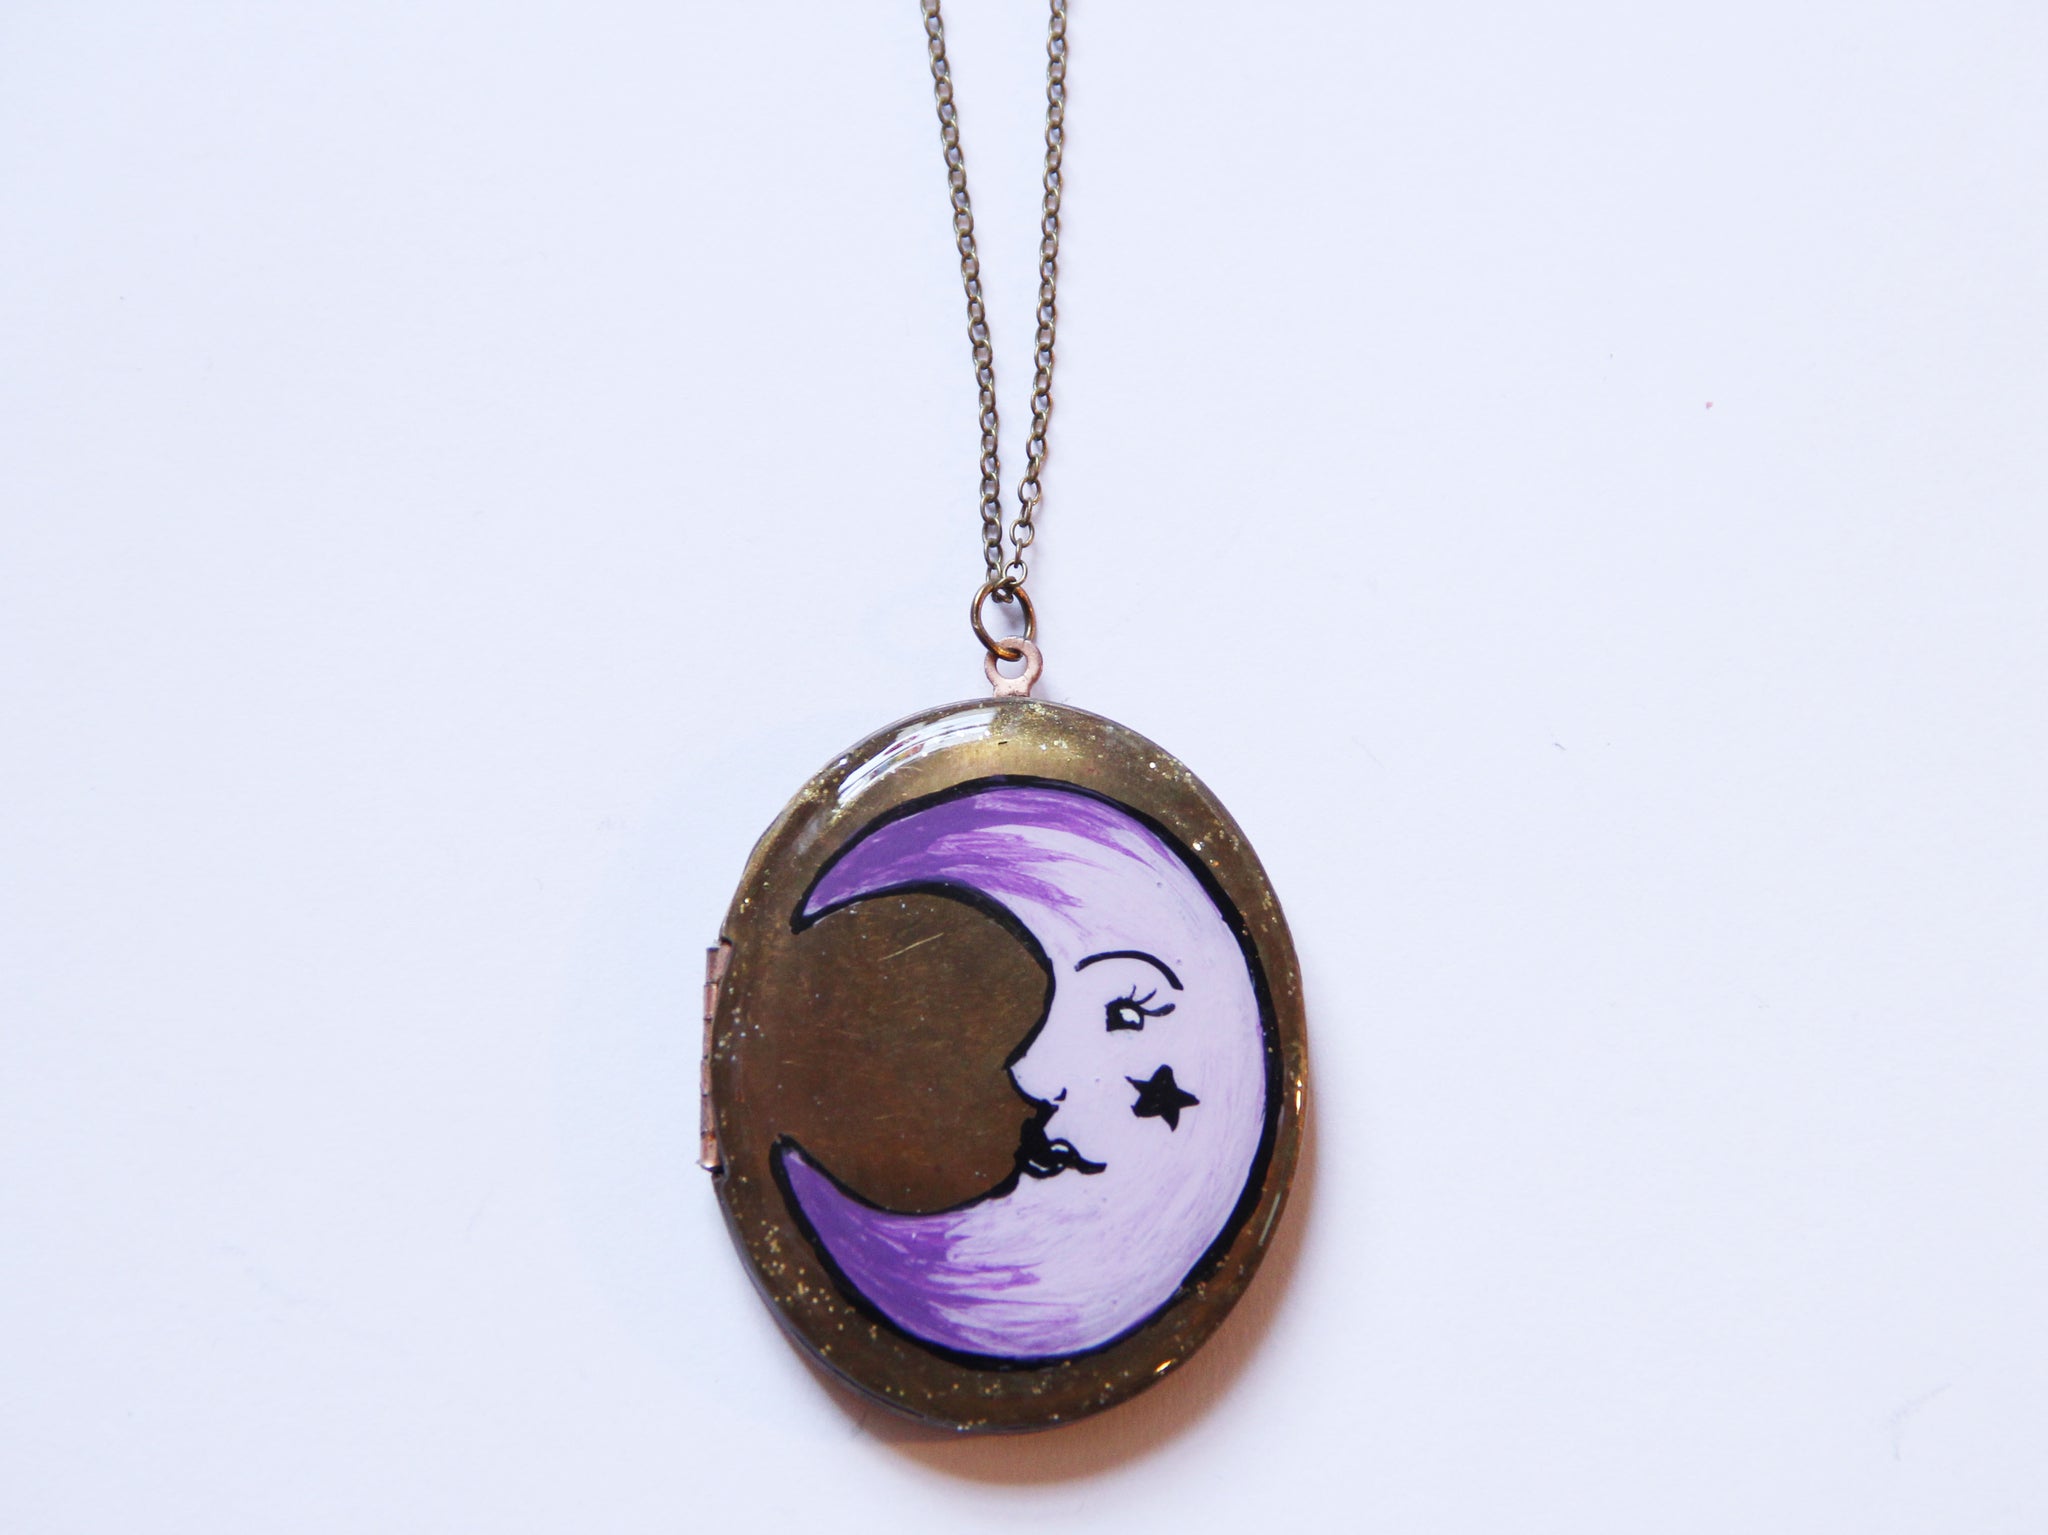 Hand Painted One of a Kind Moon Locket